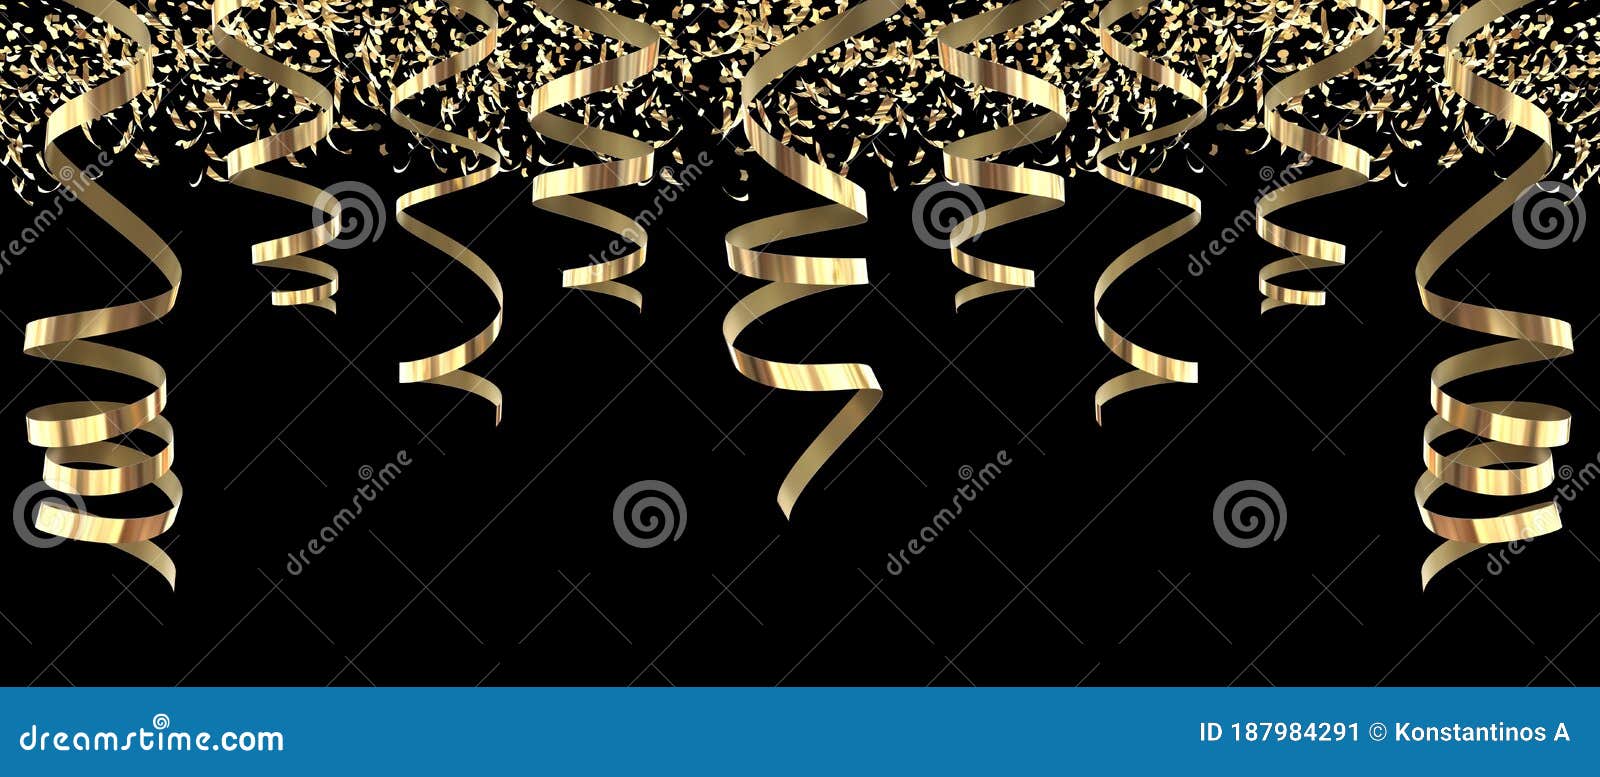 thank you carnival party confeti decoration background colors - 3d rendering